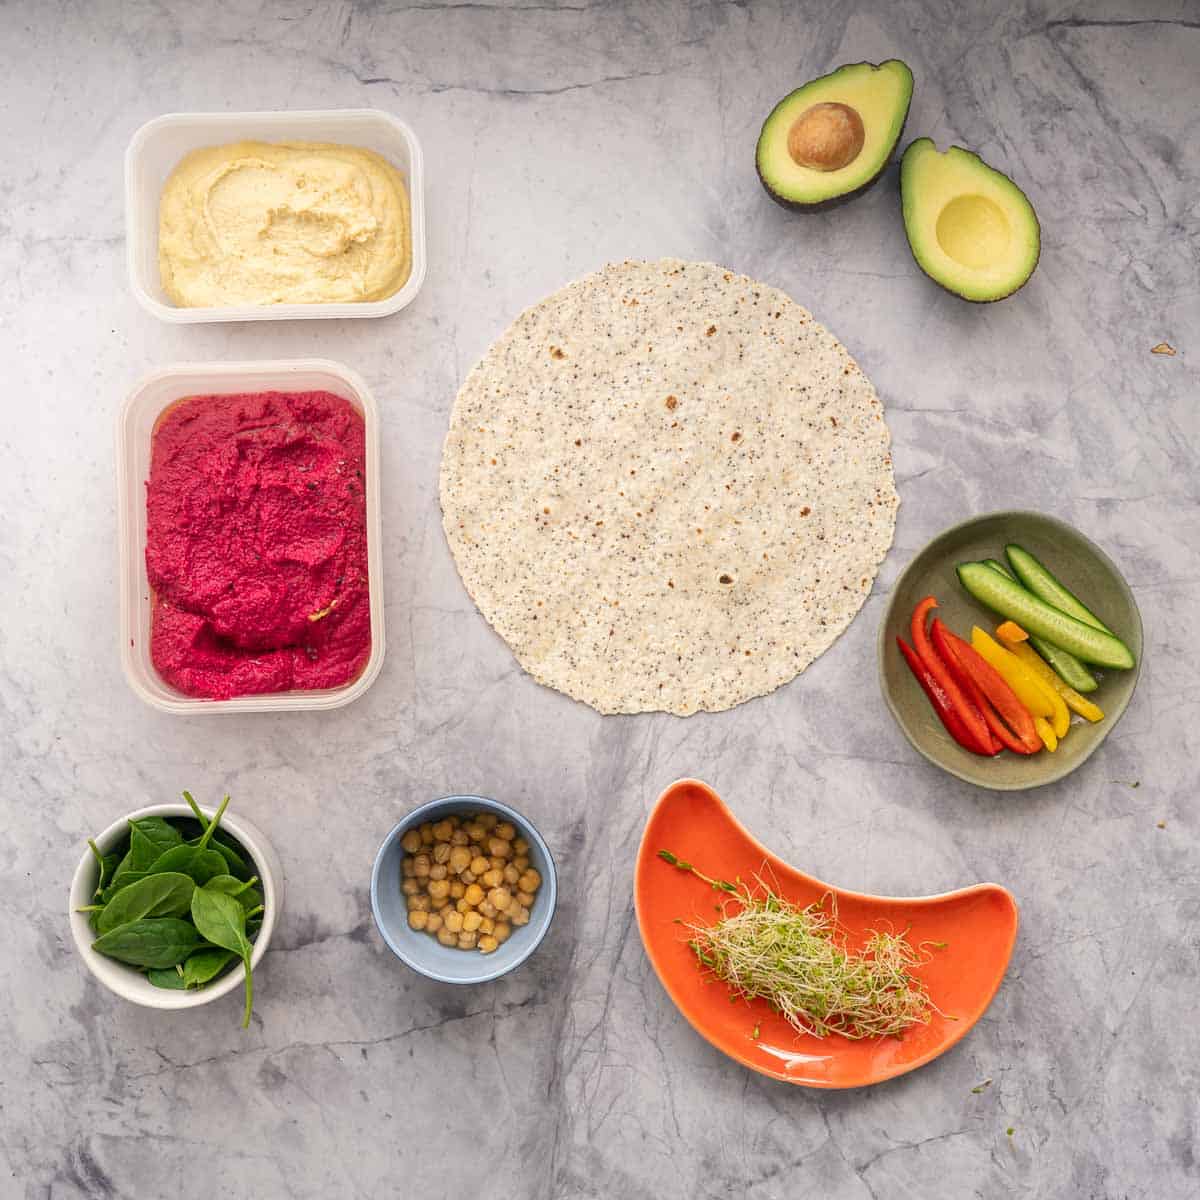 Containers of beetroot hummus and regular hummus sitting next to a wholegrain wrap, halved avocado, and individual ramekins of chickpeas, spinach, sprouts and sliced vegetables